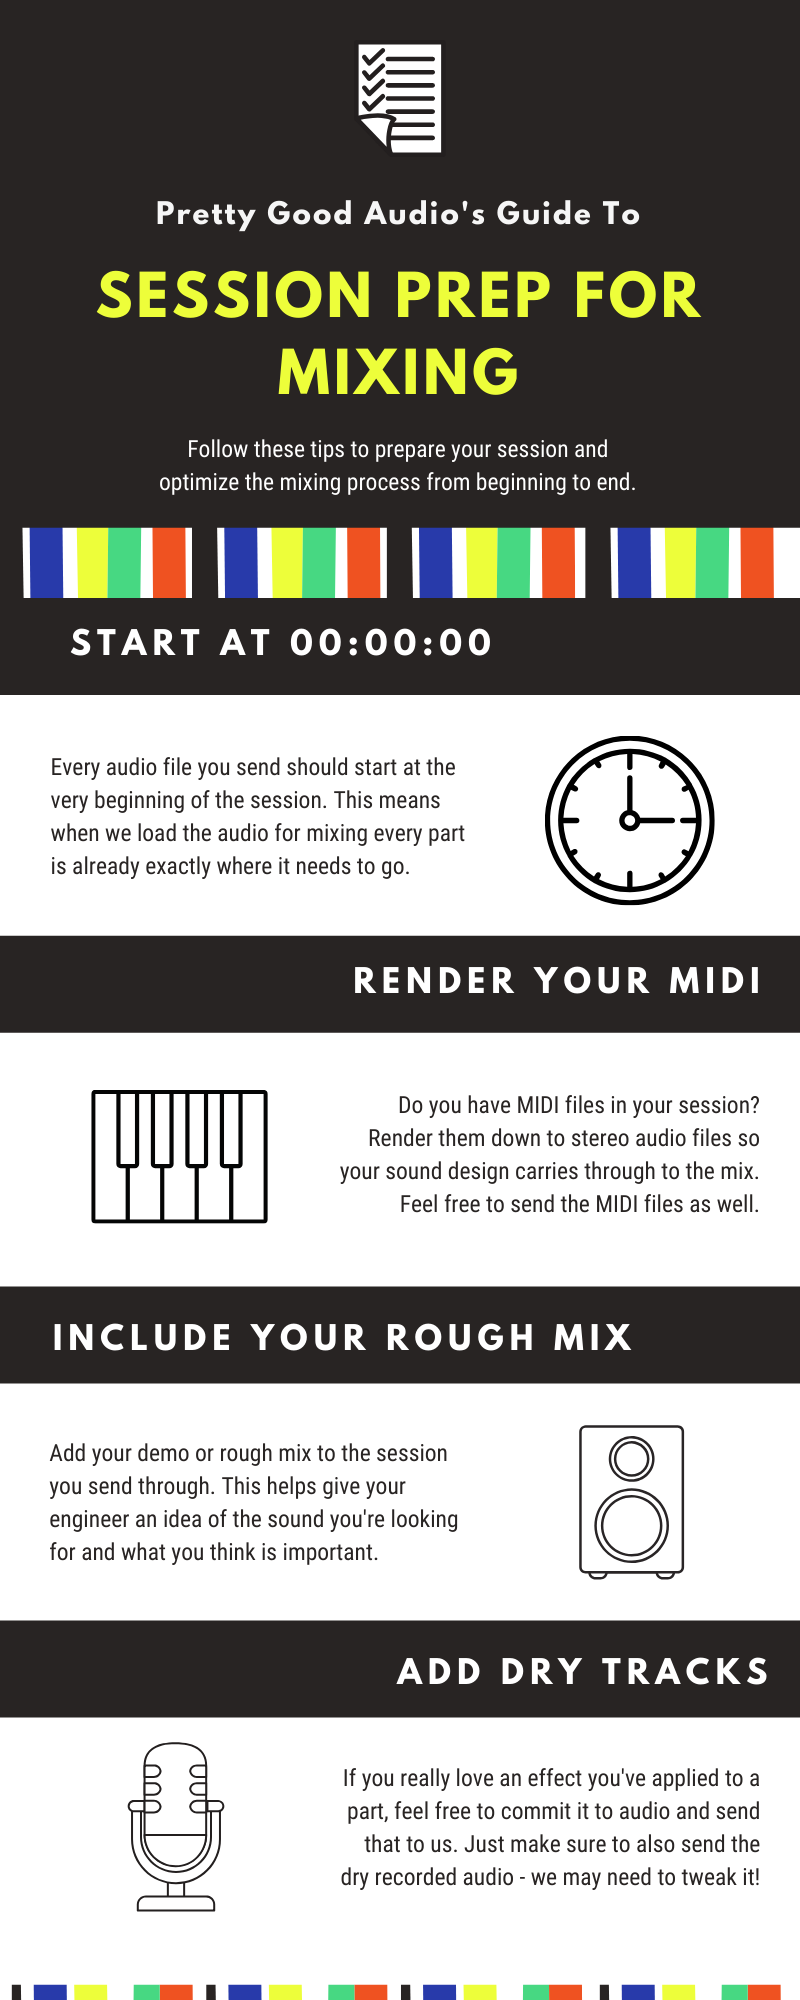 An infographic summarizing tips for preparing music for mixing